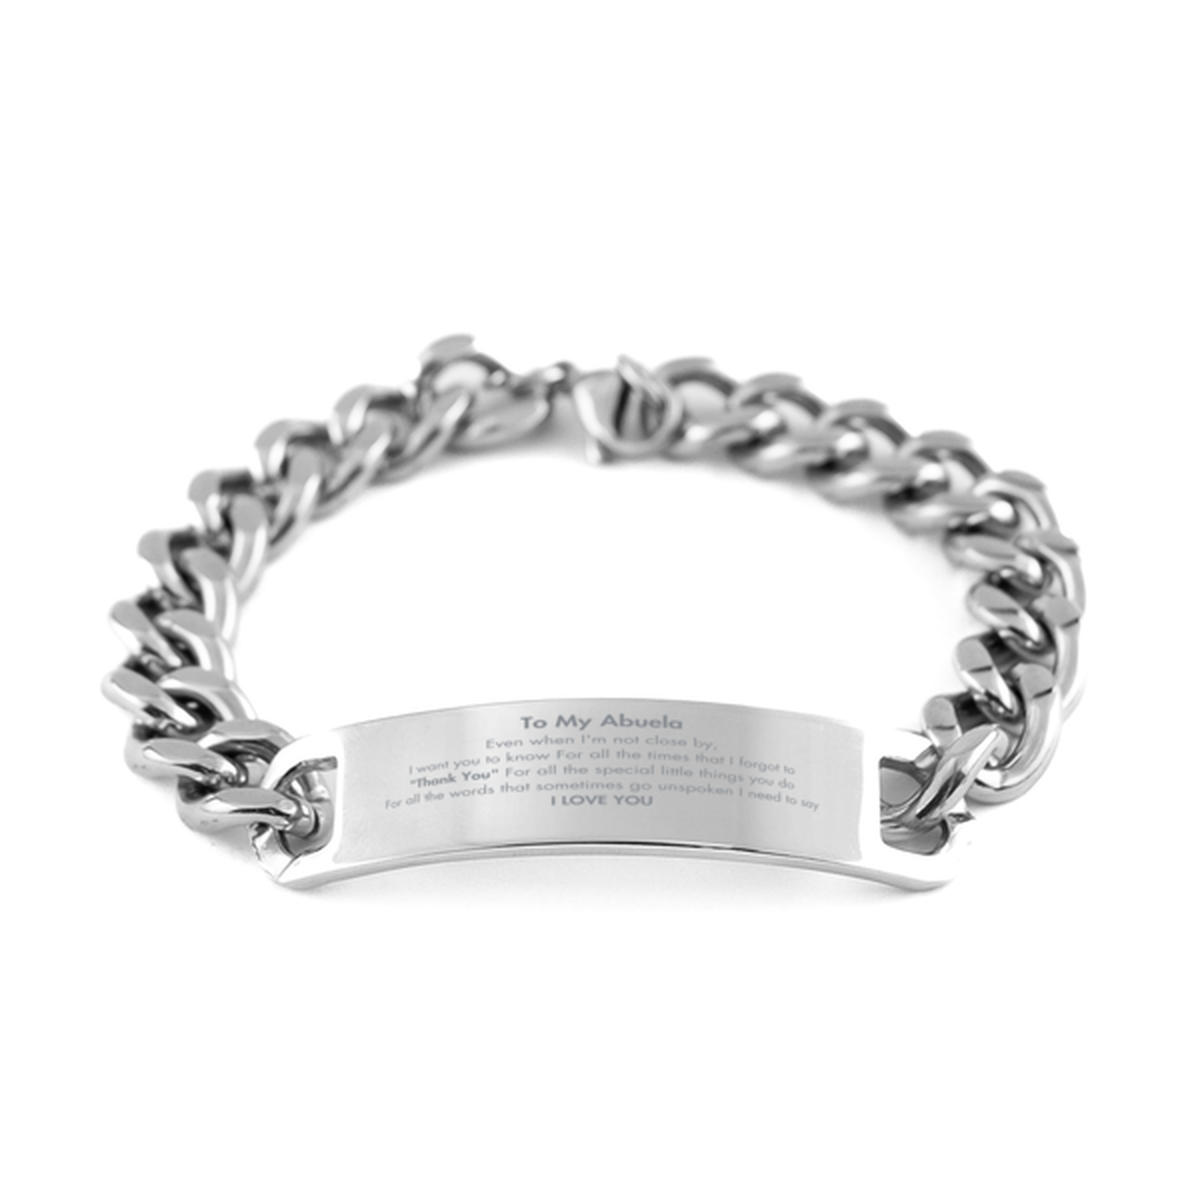 Thank You Gifts for Abuela, Keepsake Cuban Chain Stainless Steel Bracelet Gifts for Abuela Birthday Mother's day Father's Day Abuela For all the words That sometimes go unspoken I need to say I LOVE YOU